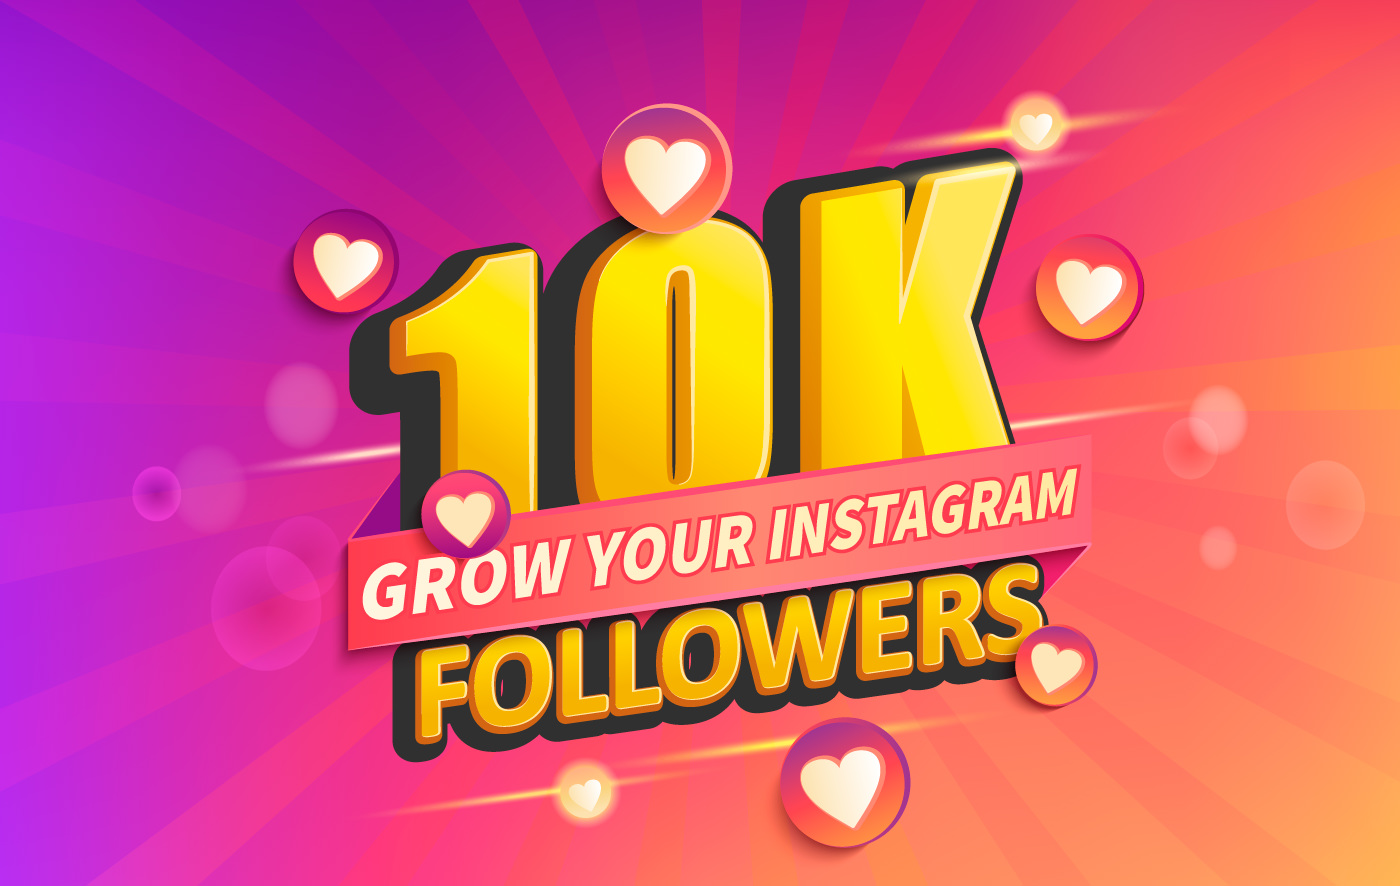 phlearn magazine7 tips to grow your instagram account to 10k followers - followers instagram tips